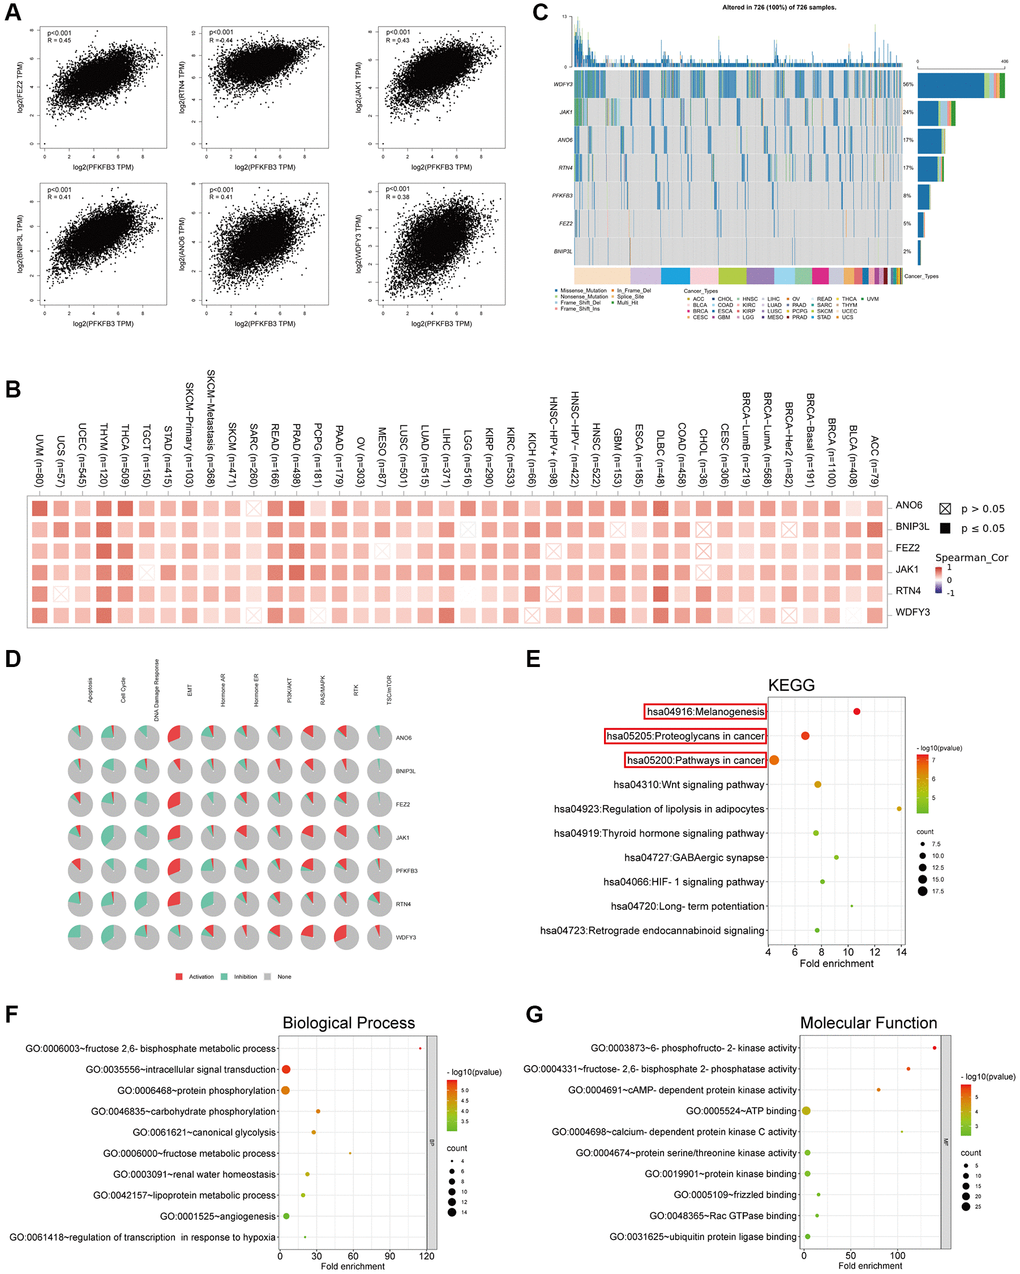 Genes enrichment analysis of PFKFB3 in pan-cancer. (A) The association between PFKFB3 and representative genes among the top PFKFB3-related genes analyzed by GEPIA2 in pan-cancer. (B) Heatmap shows the correlation between PFKFB3 and selected genes in pan-cancer. (C) Single Nucleotide Variation (SNV) frequency analysis of selected genes in pan-cancer. (D) Pathway activity analysis of selected genes in pan-cancer. (E) KEGG pathway analysis of PFKFB3-binding proteins and PFKFB3-correlated gene. (F, G) Go analysis of PFKFB3-binding proteins and PFKFB3-correlated gene, biological process (F), molecular function (G).